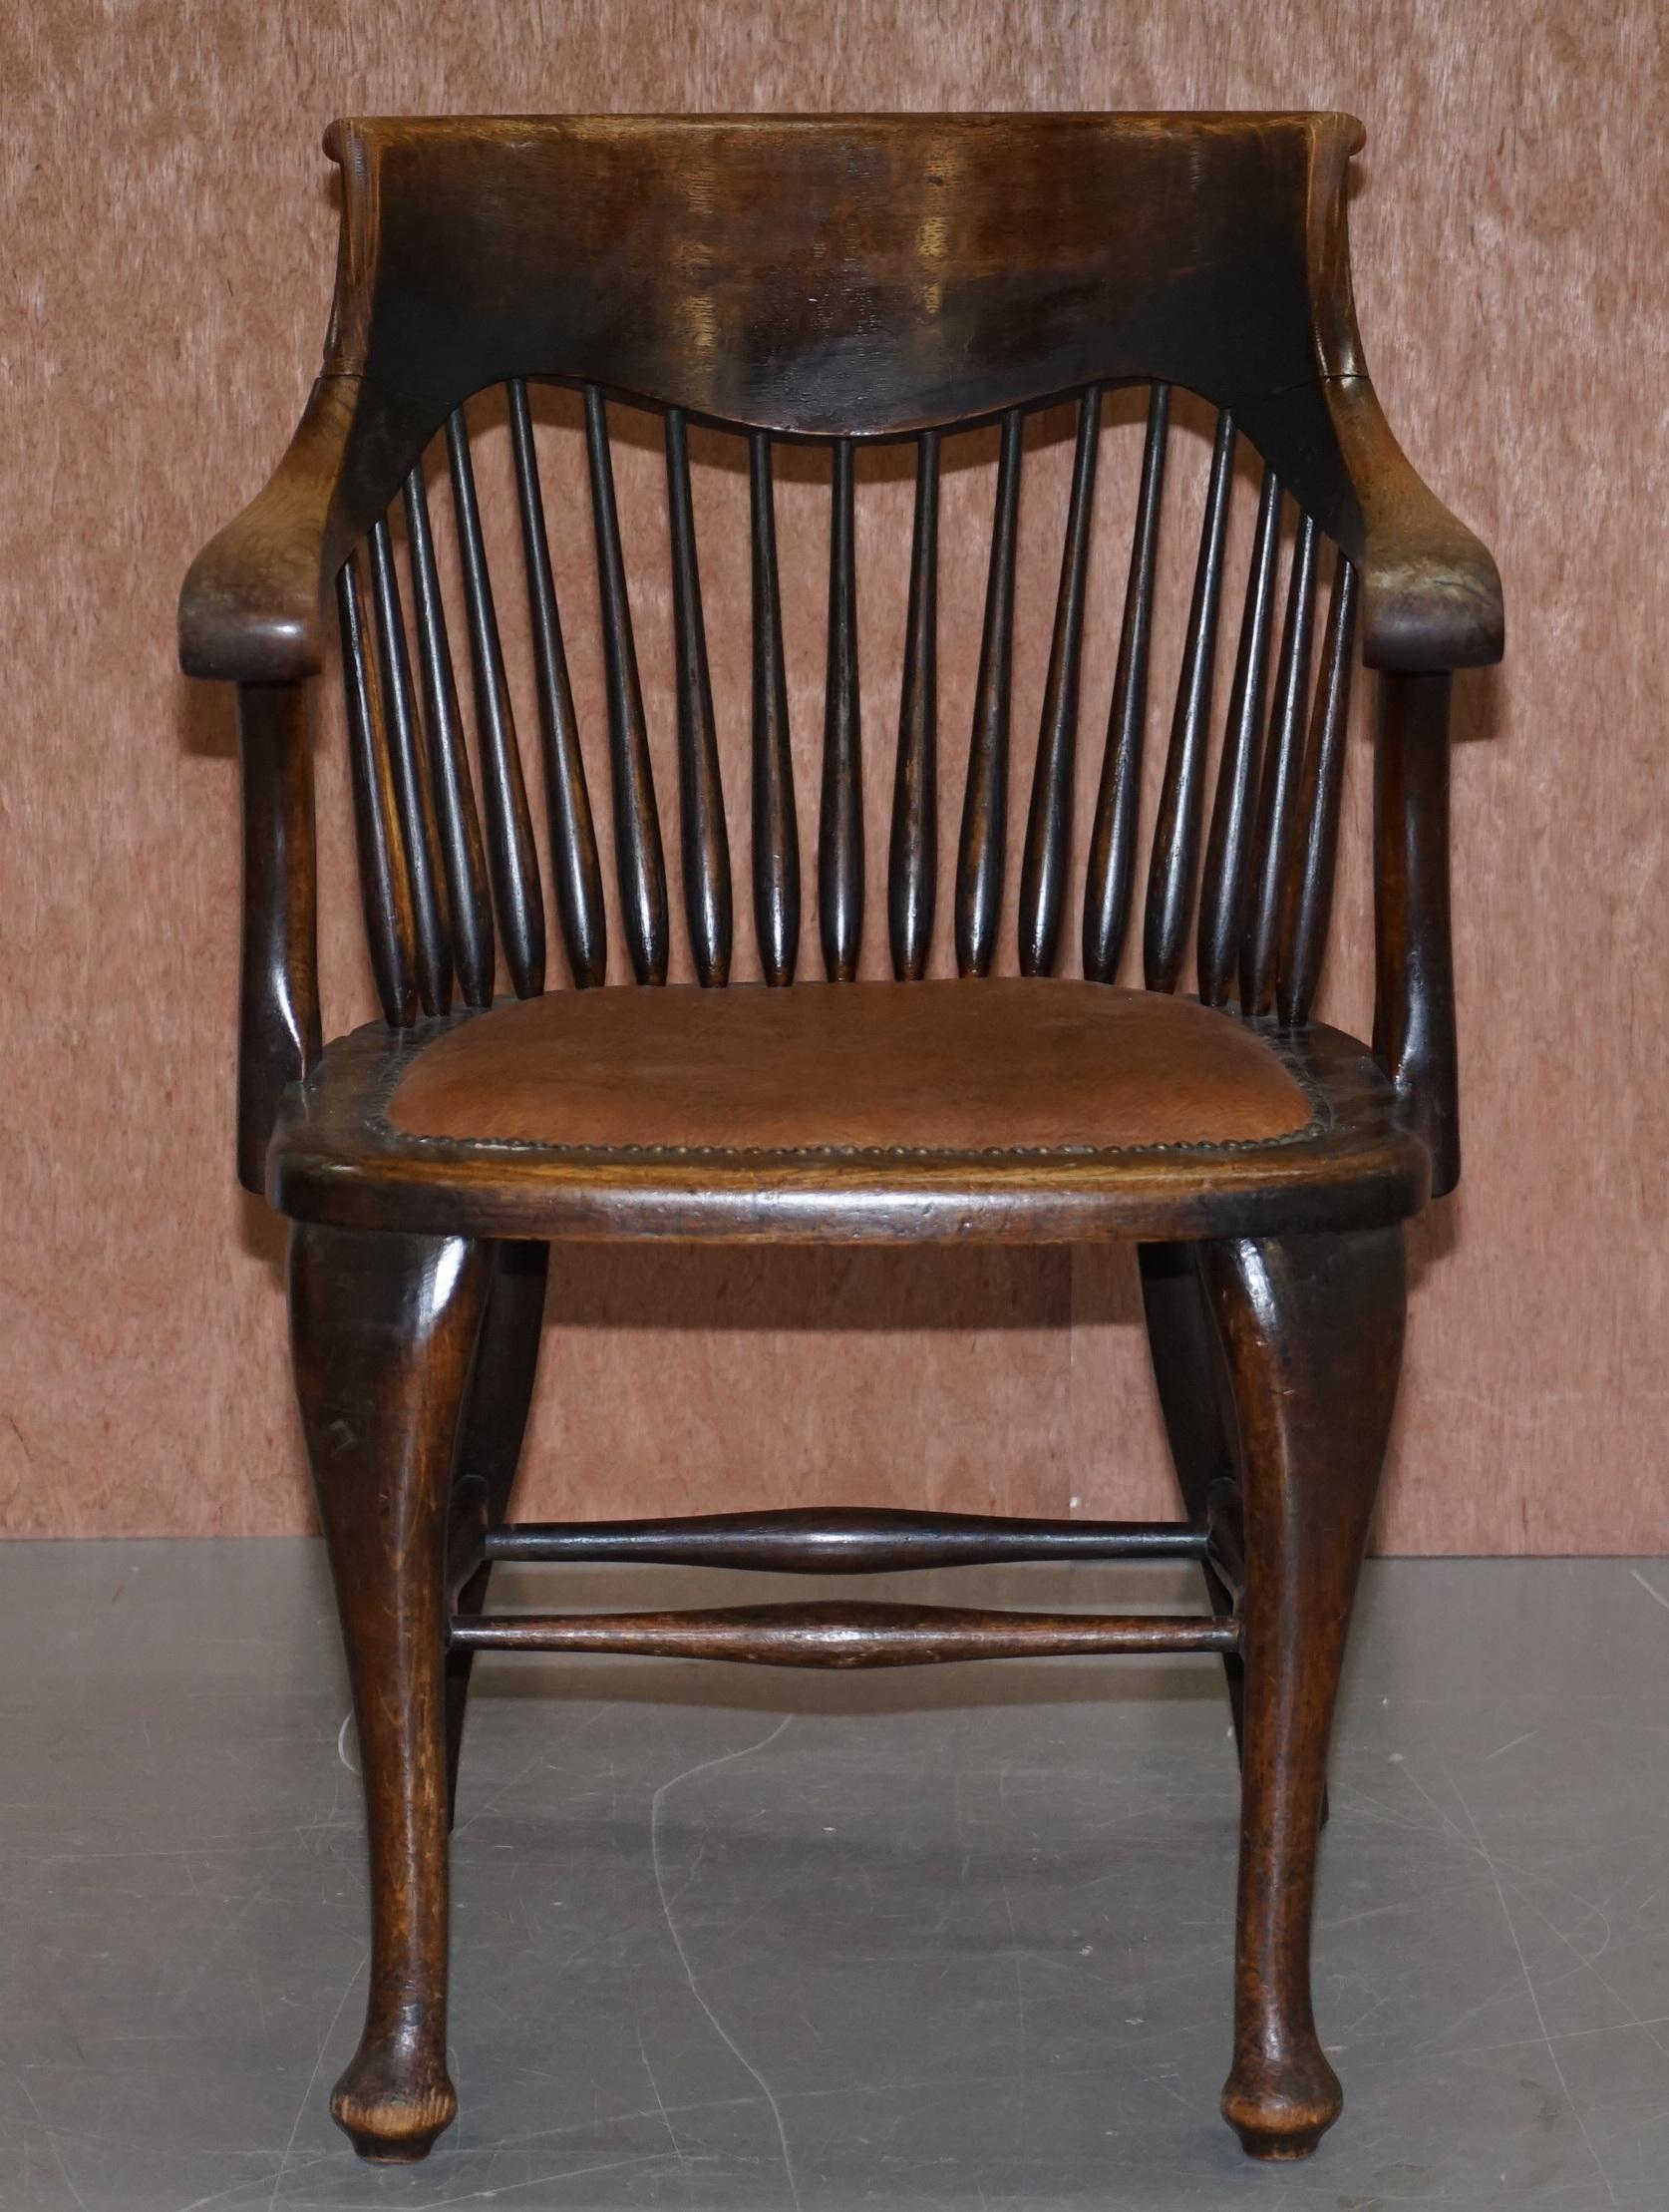 We are delighted to offer for sale this lovely original Edwardian English oak Ralph Johnson stamped captains chair

A very good looking and well made piece, I have two of these chairs, both the same apart from the colour of the leather seat bases,